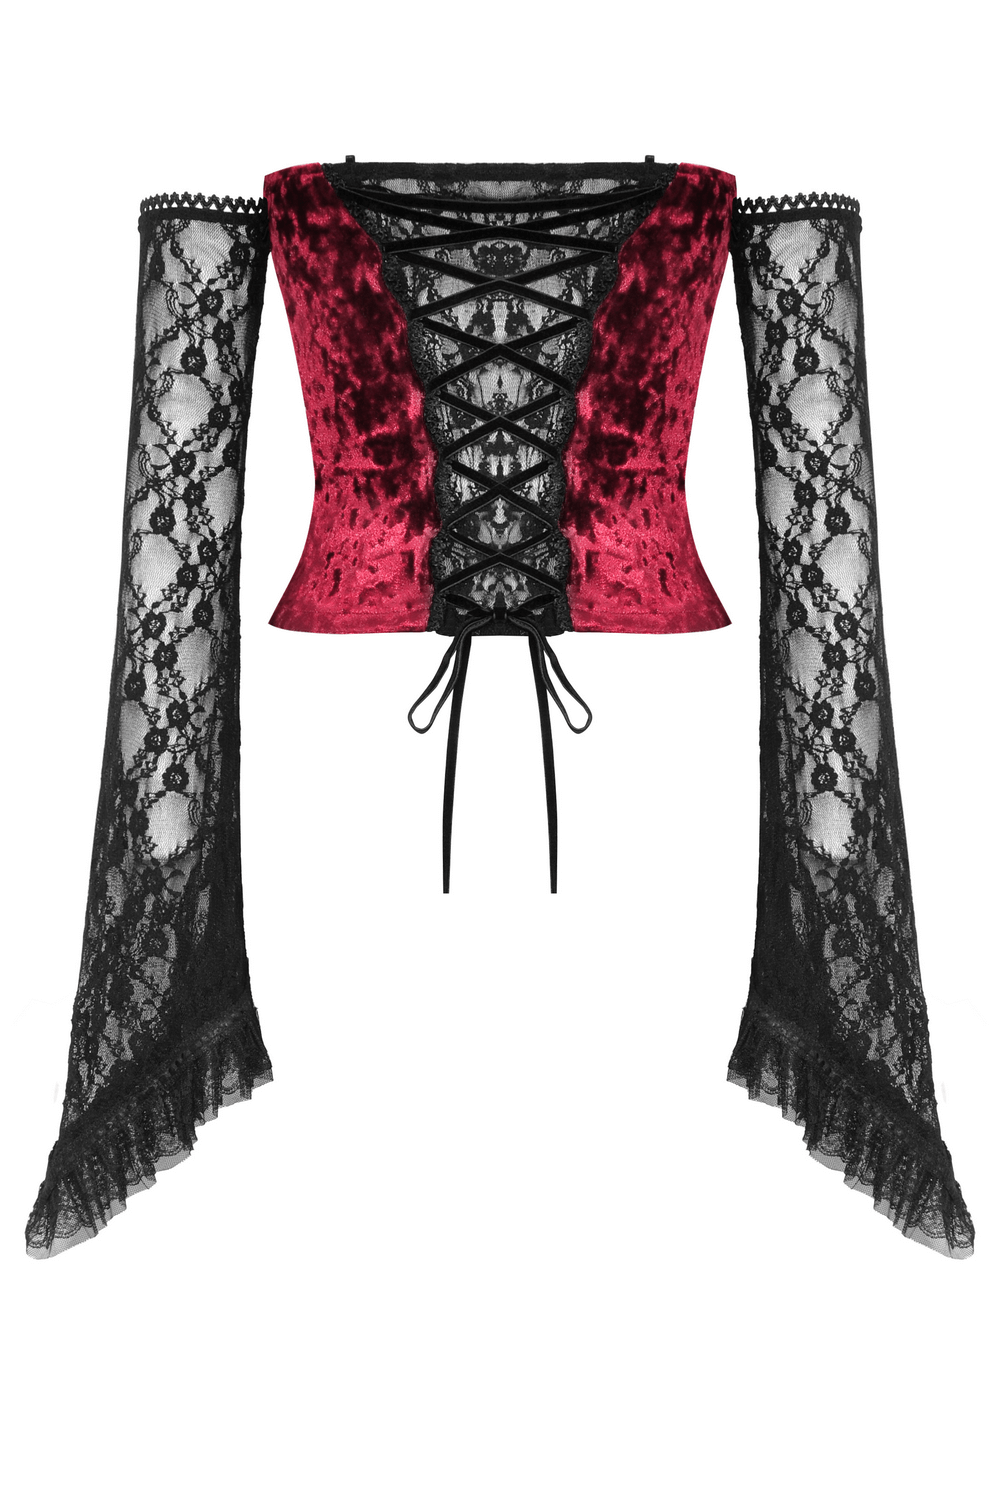 Gothic Burgundy Velvet Corset Top with Black Lace Sleeves